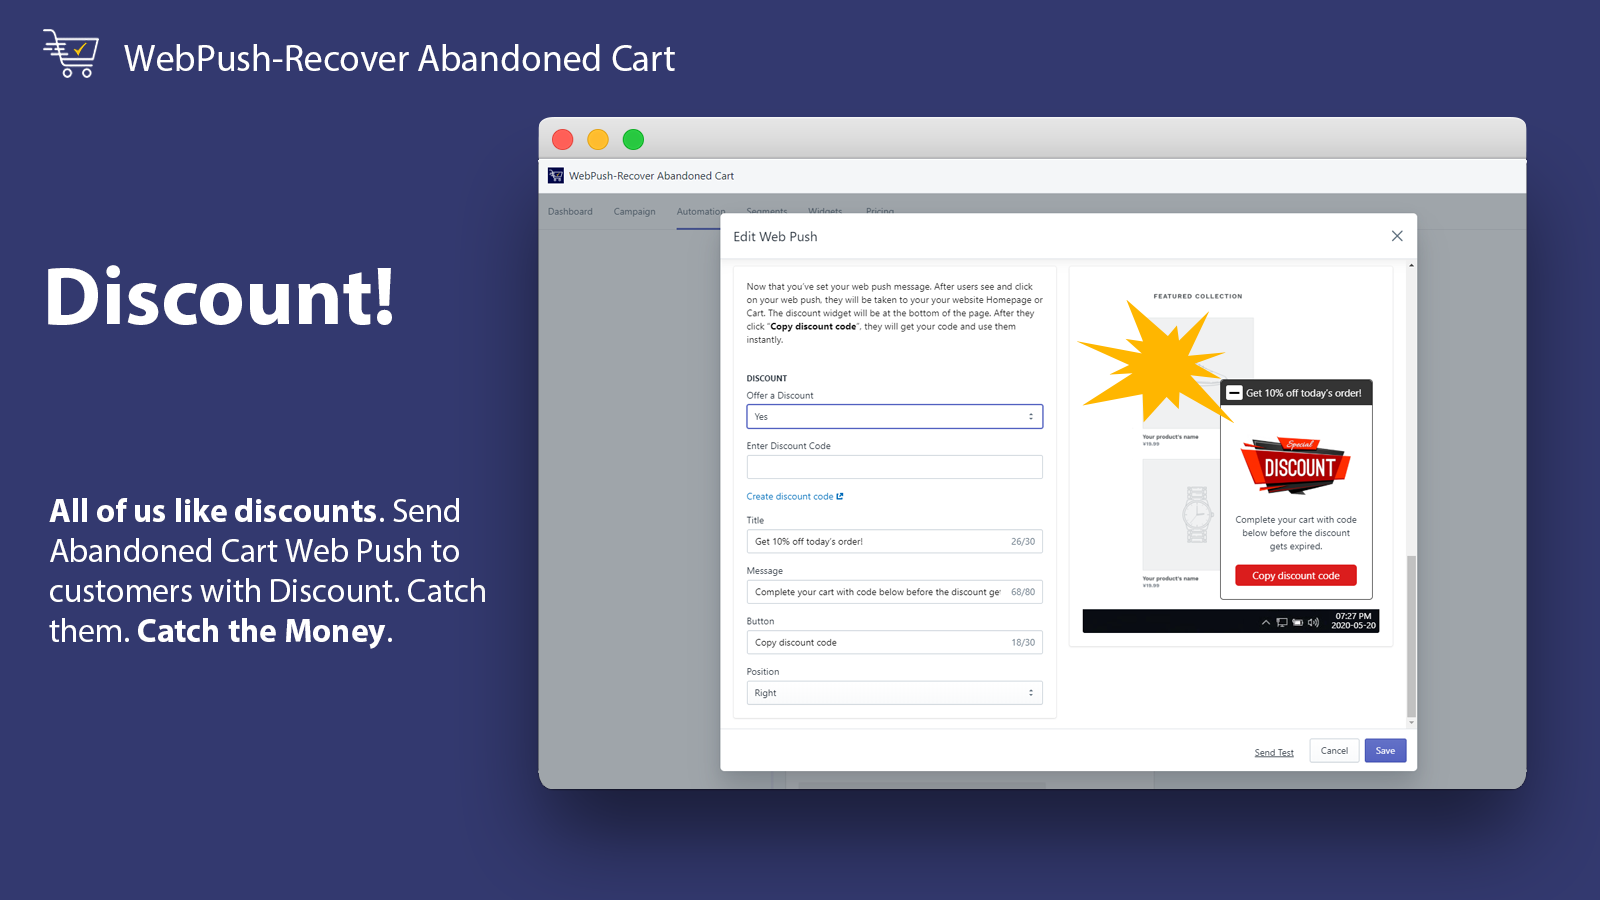 Discount_WebPush-Recover Abandoned Cart